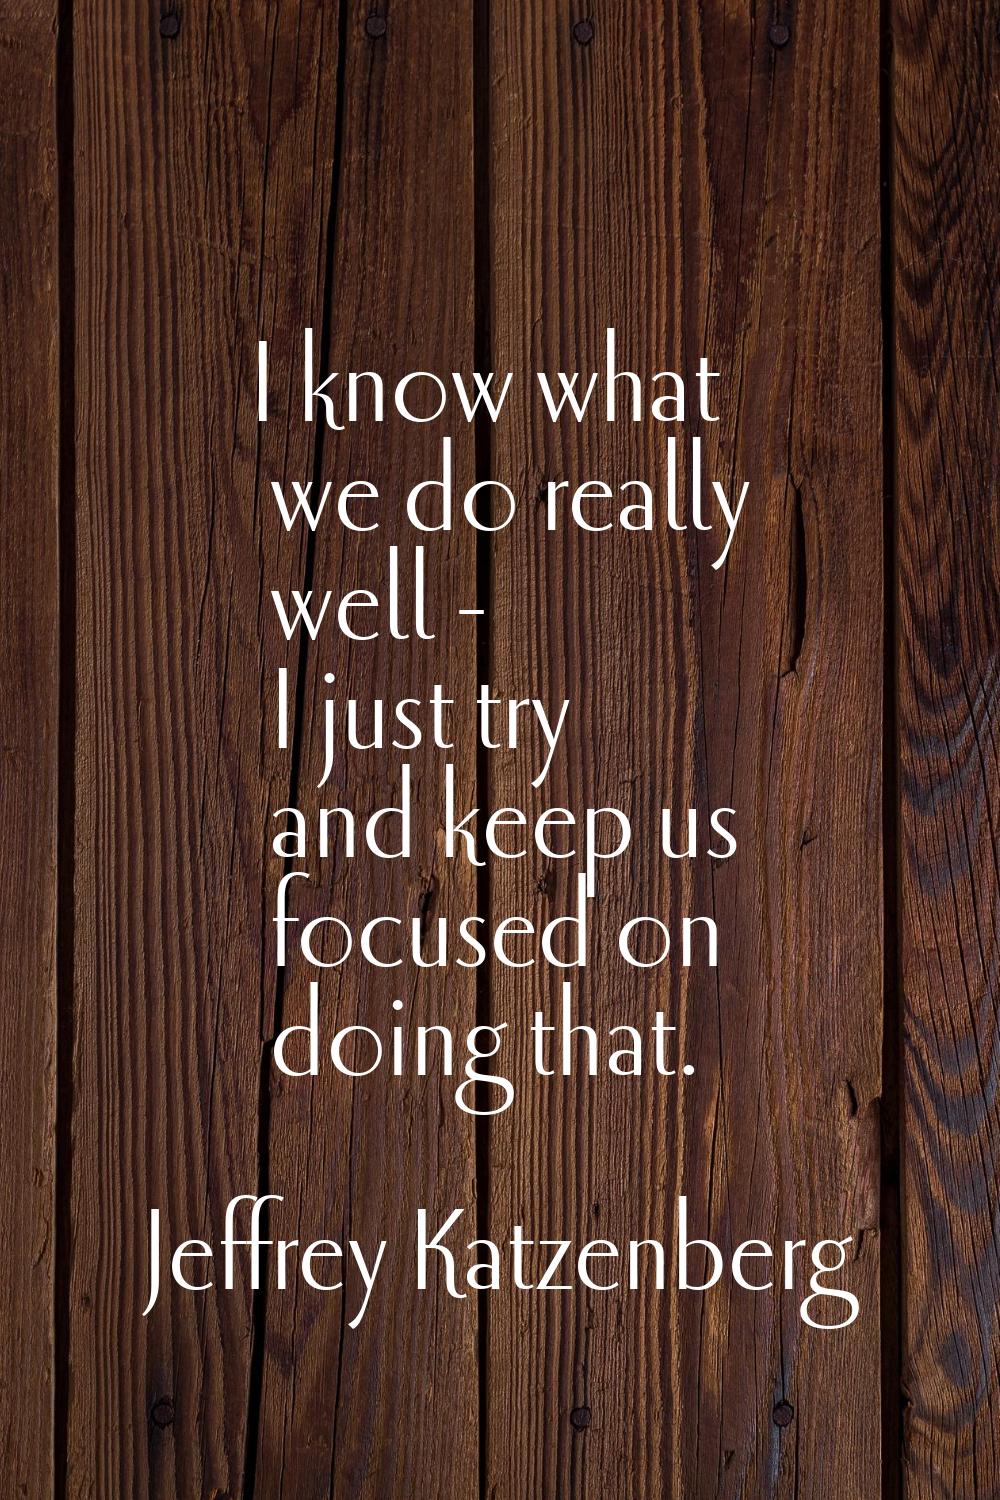 I know what we do really well - I just try and keep us focused on doing that.